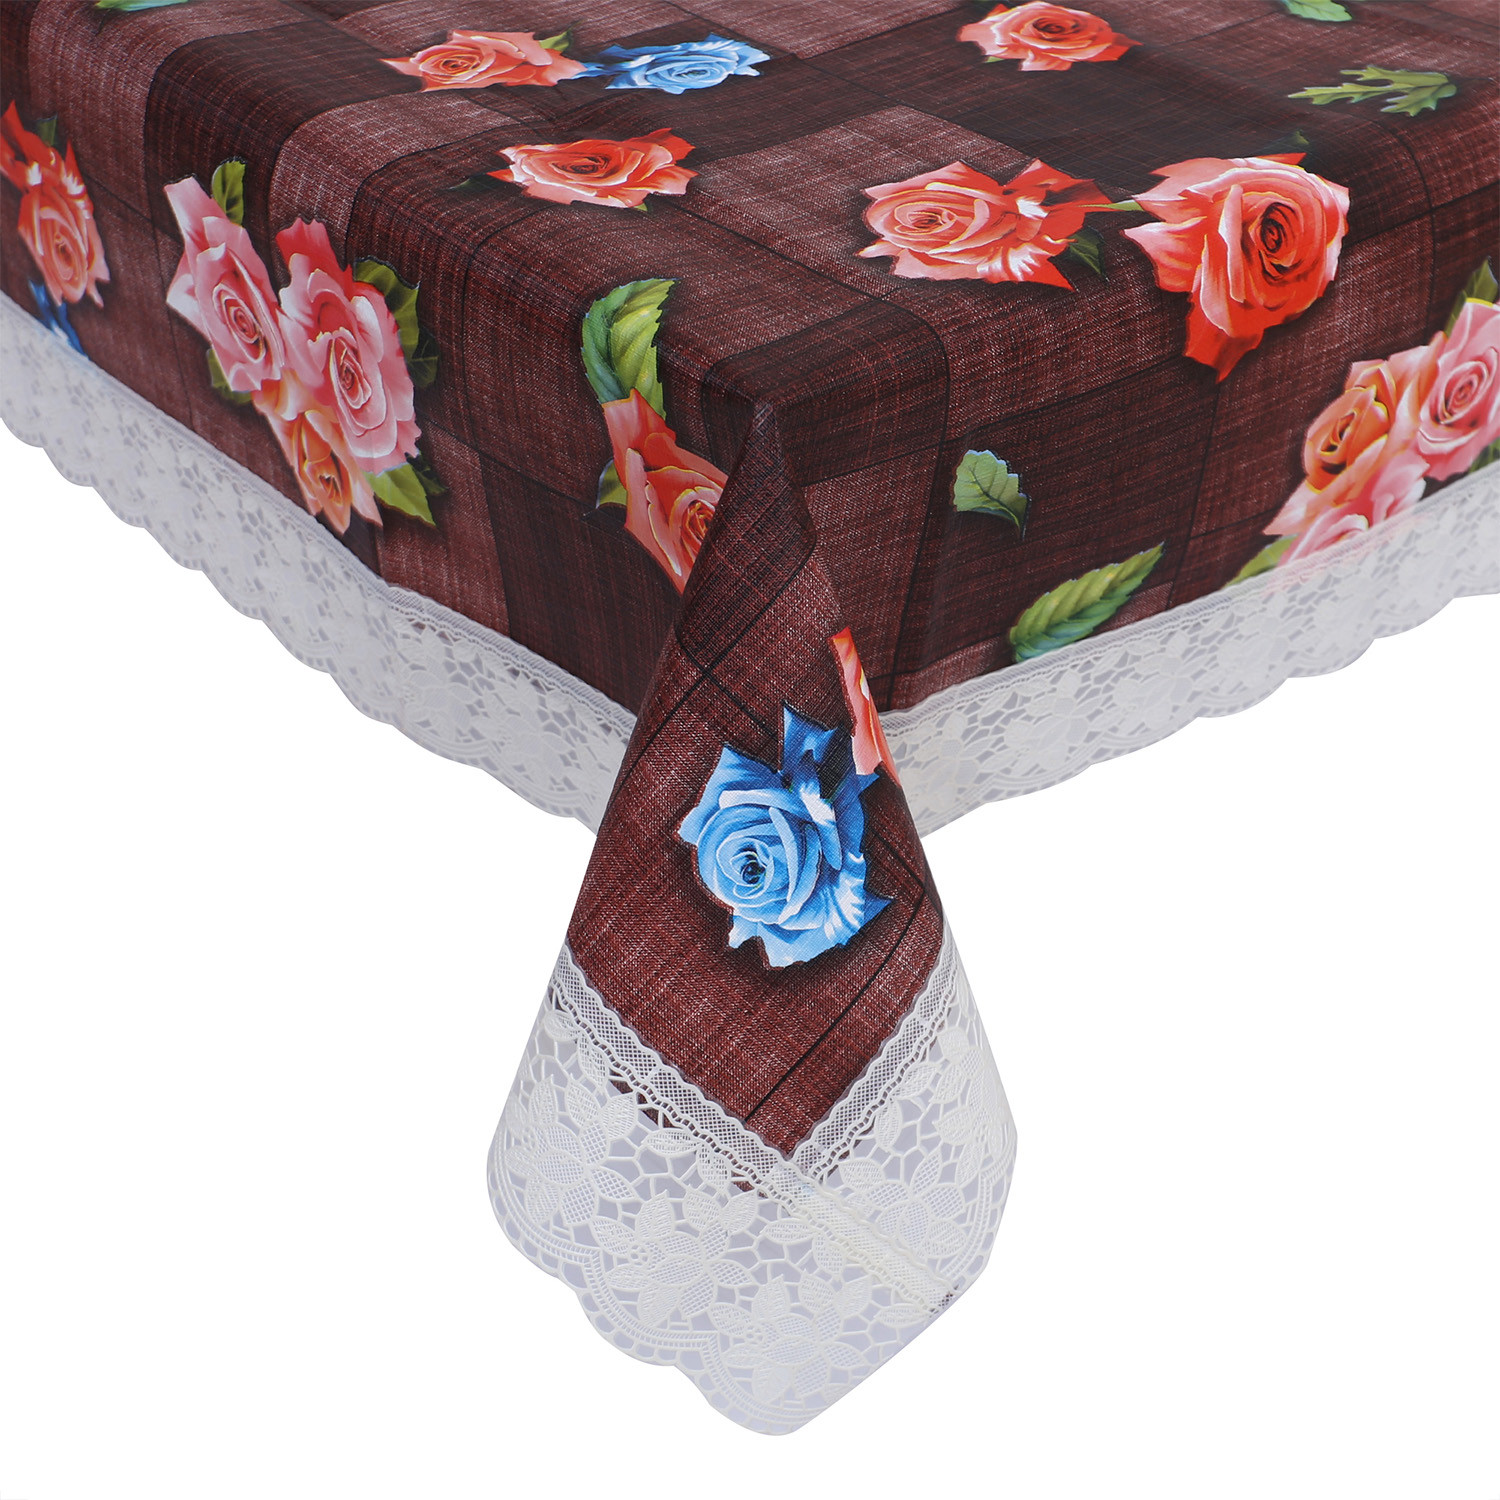 Kuber Industries Center Table Cover|Luxurious Rose Floral Pattern PVC Tablecloth|Slip Resistant Protector Table Top Cover With Seamlace Border, 40x60 Inch (Maroon)